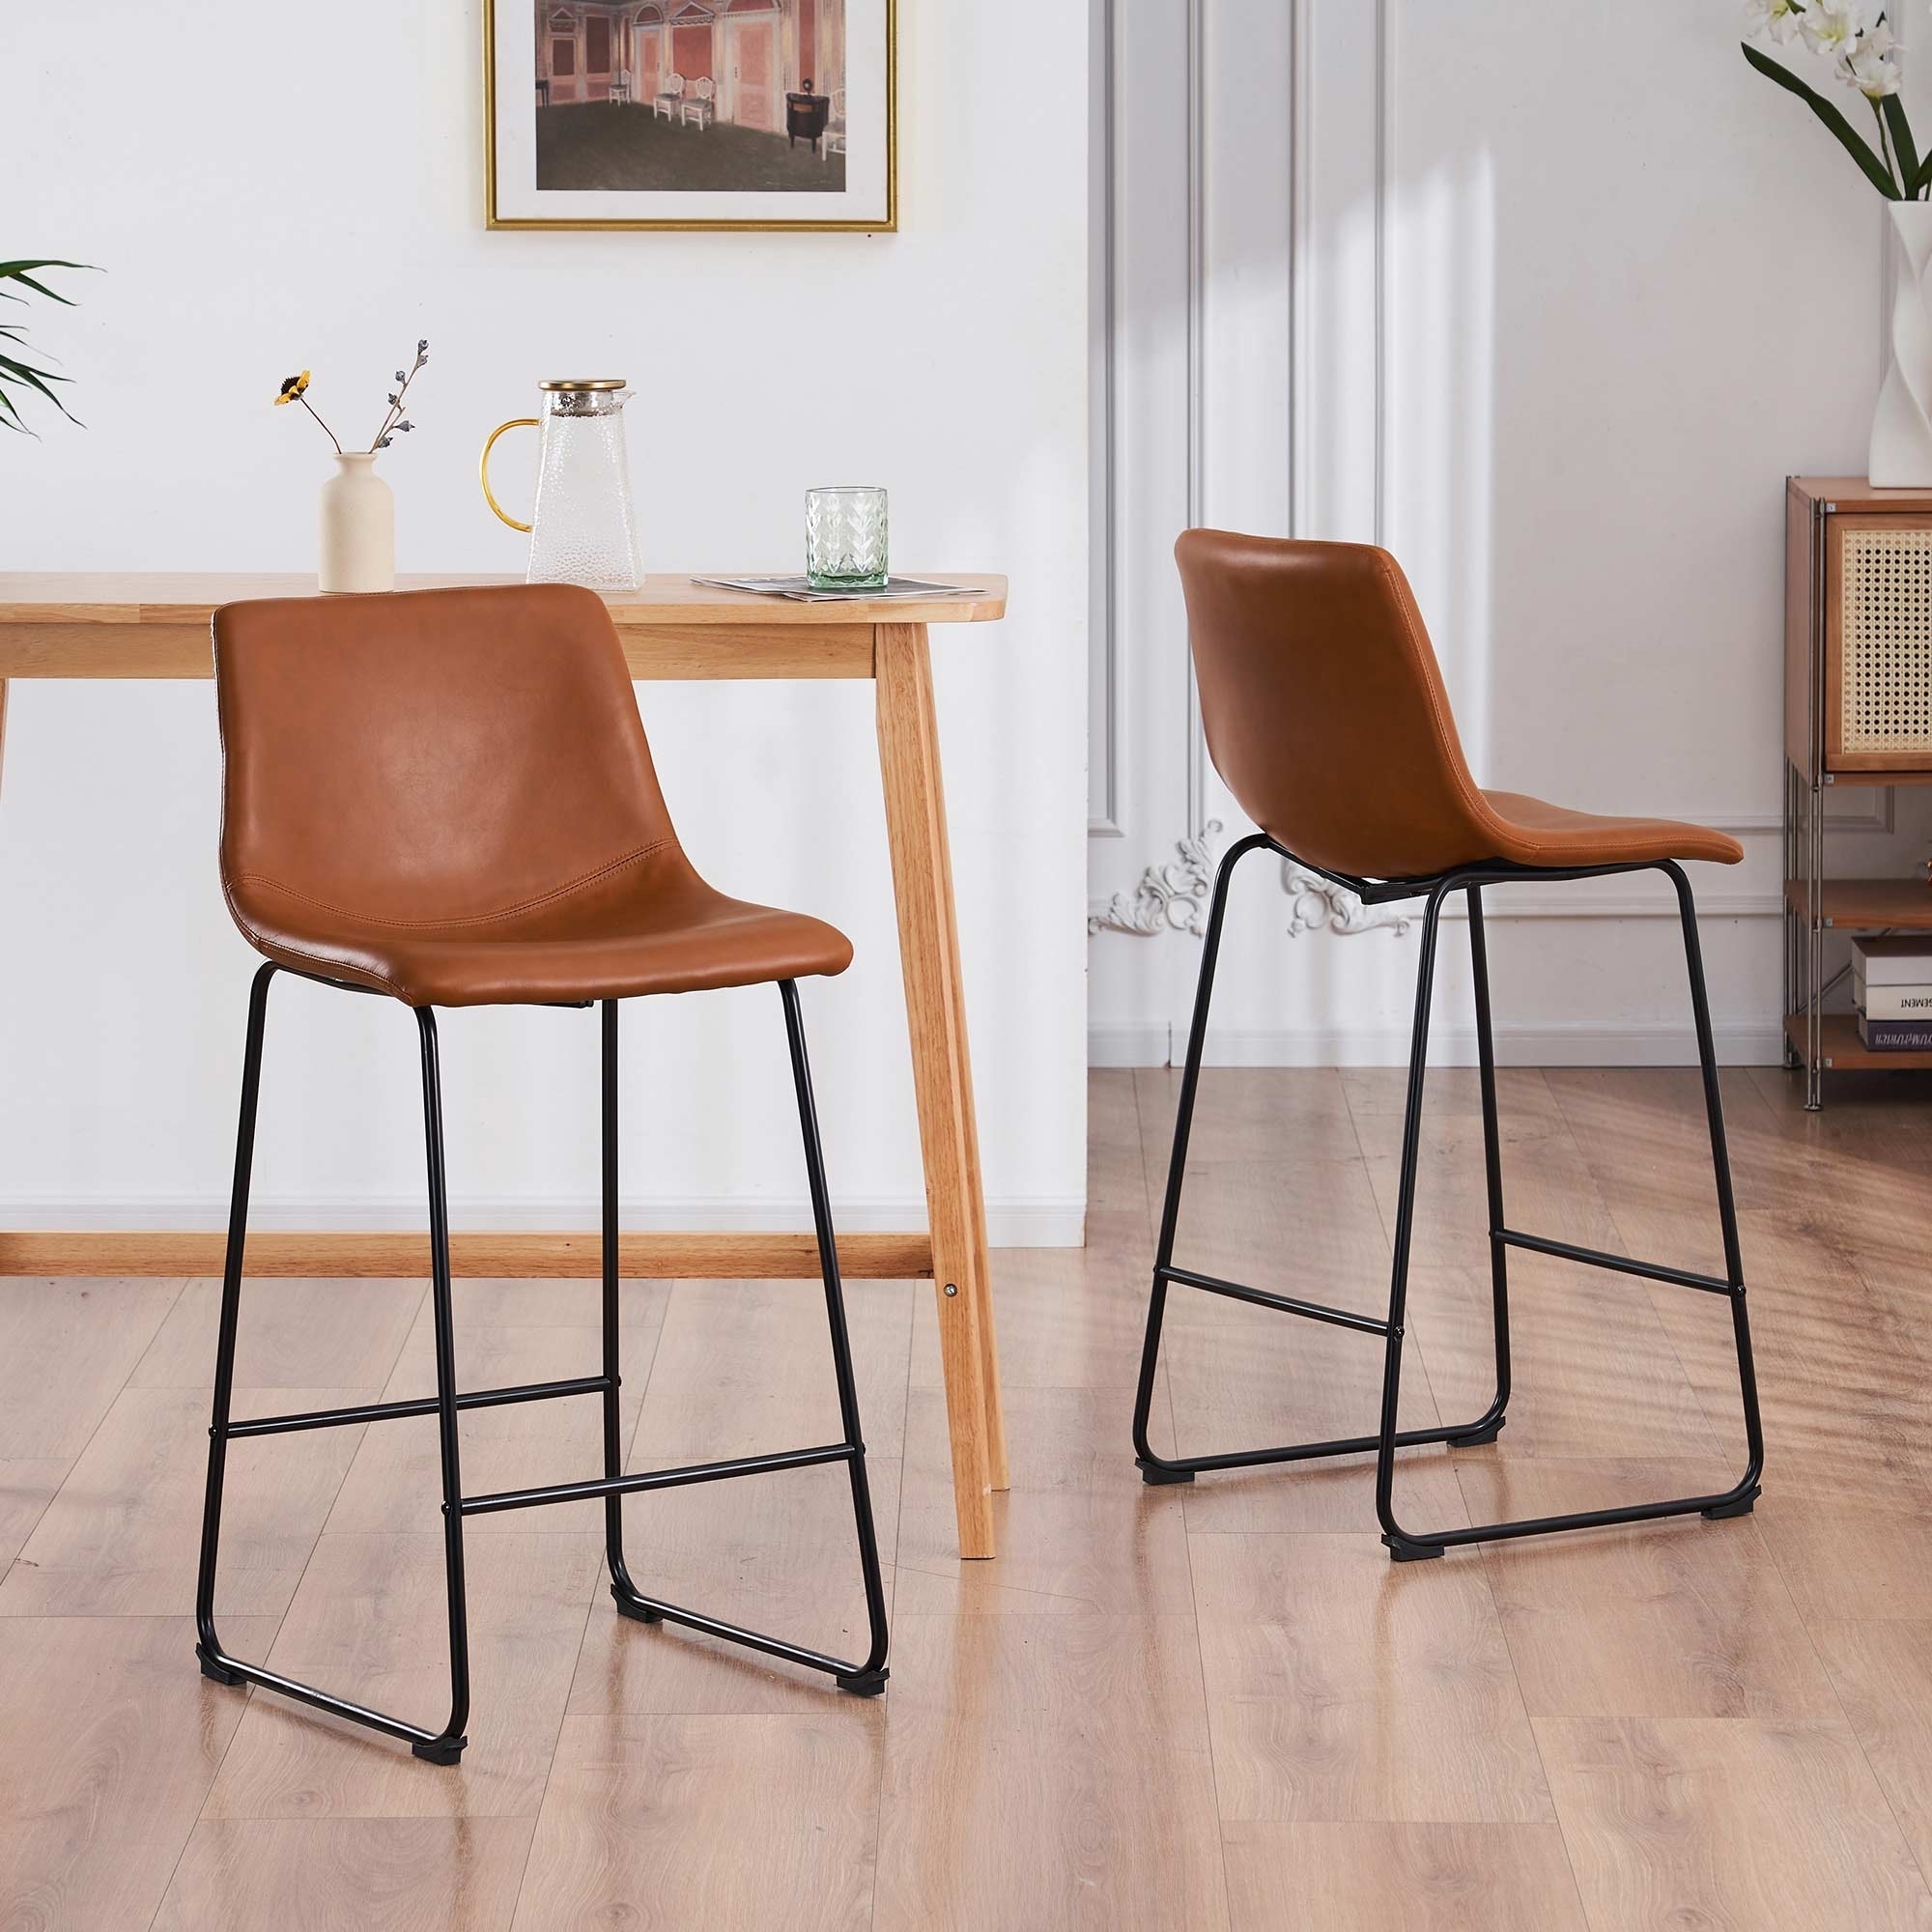 Set Of 2 Modern Upholstered Faux Leather Barstools - 26 Or 30 Counter Stool - Brown, 30